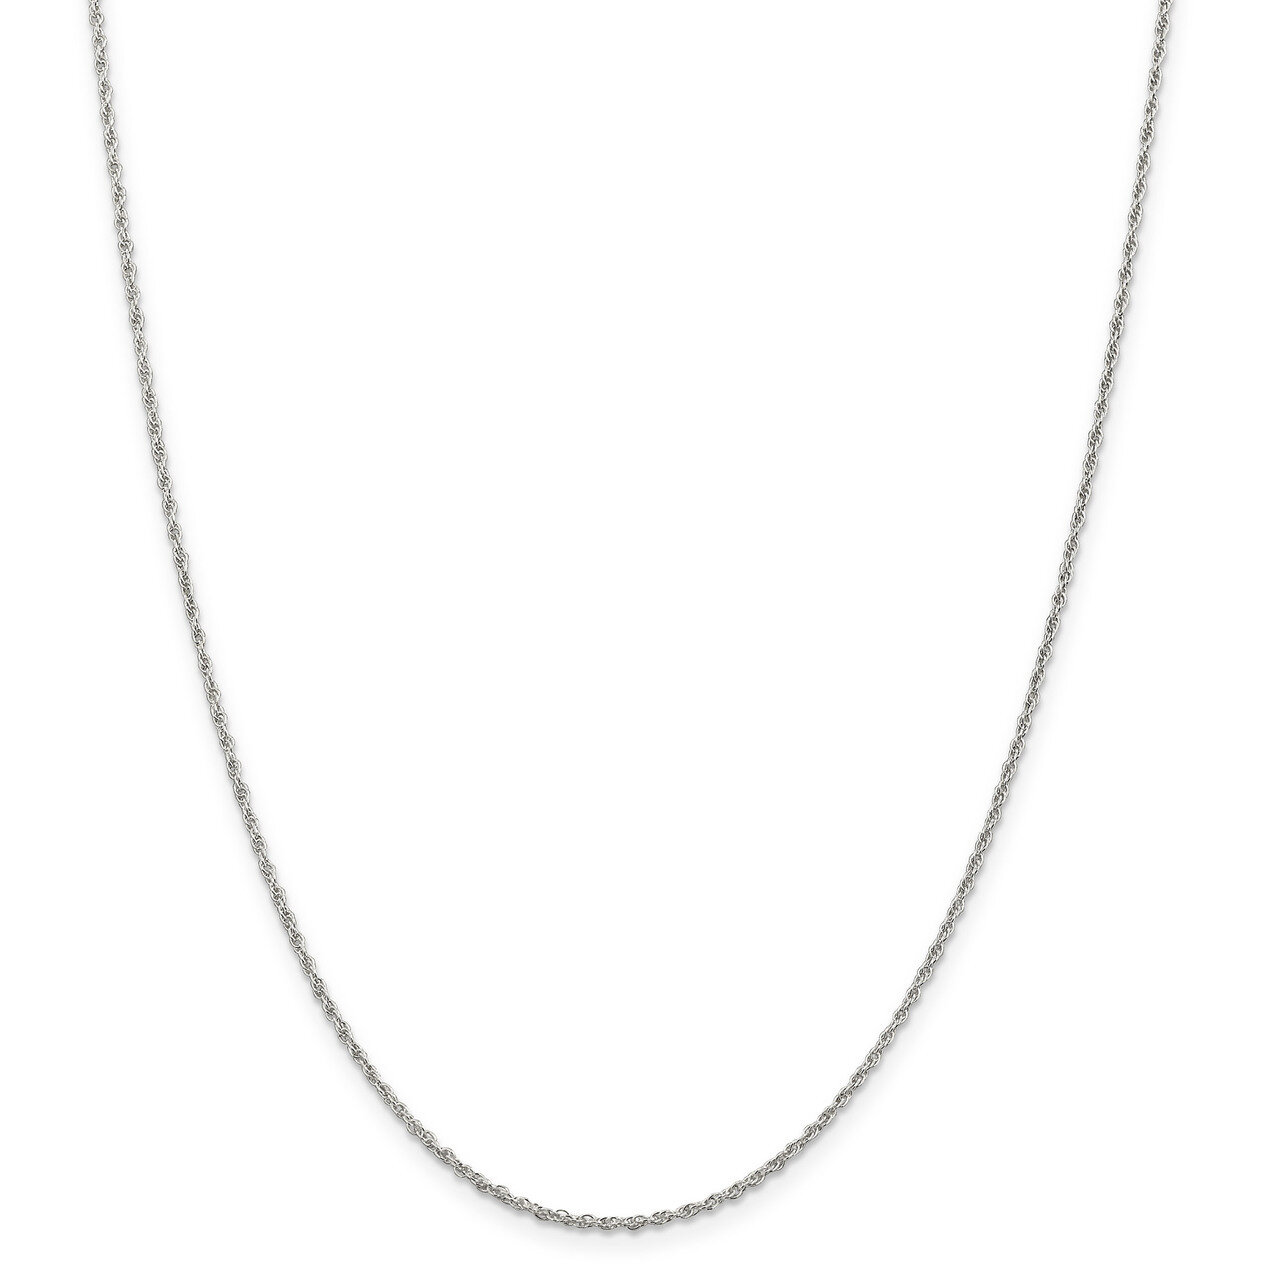 20 Inch 1.6mm Loose Rope Chain Sterling Silver QFC207-20